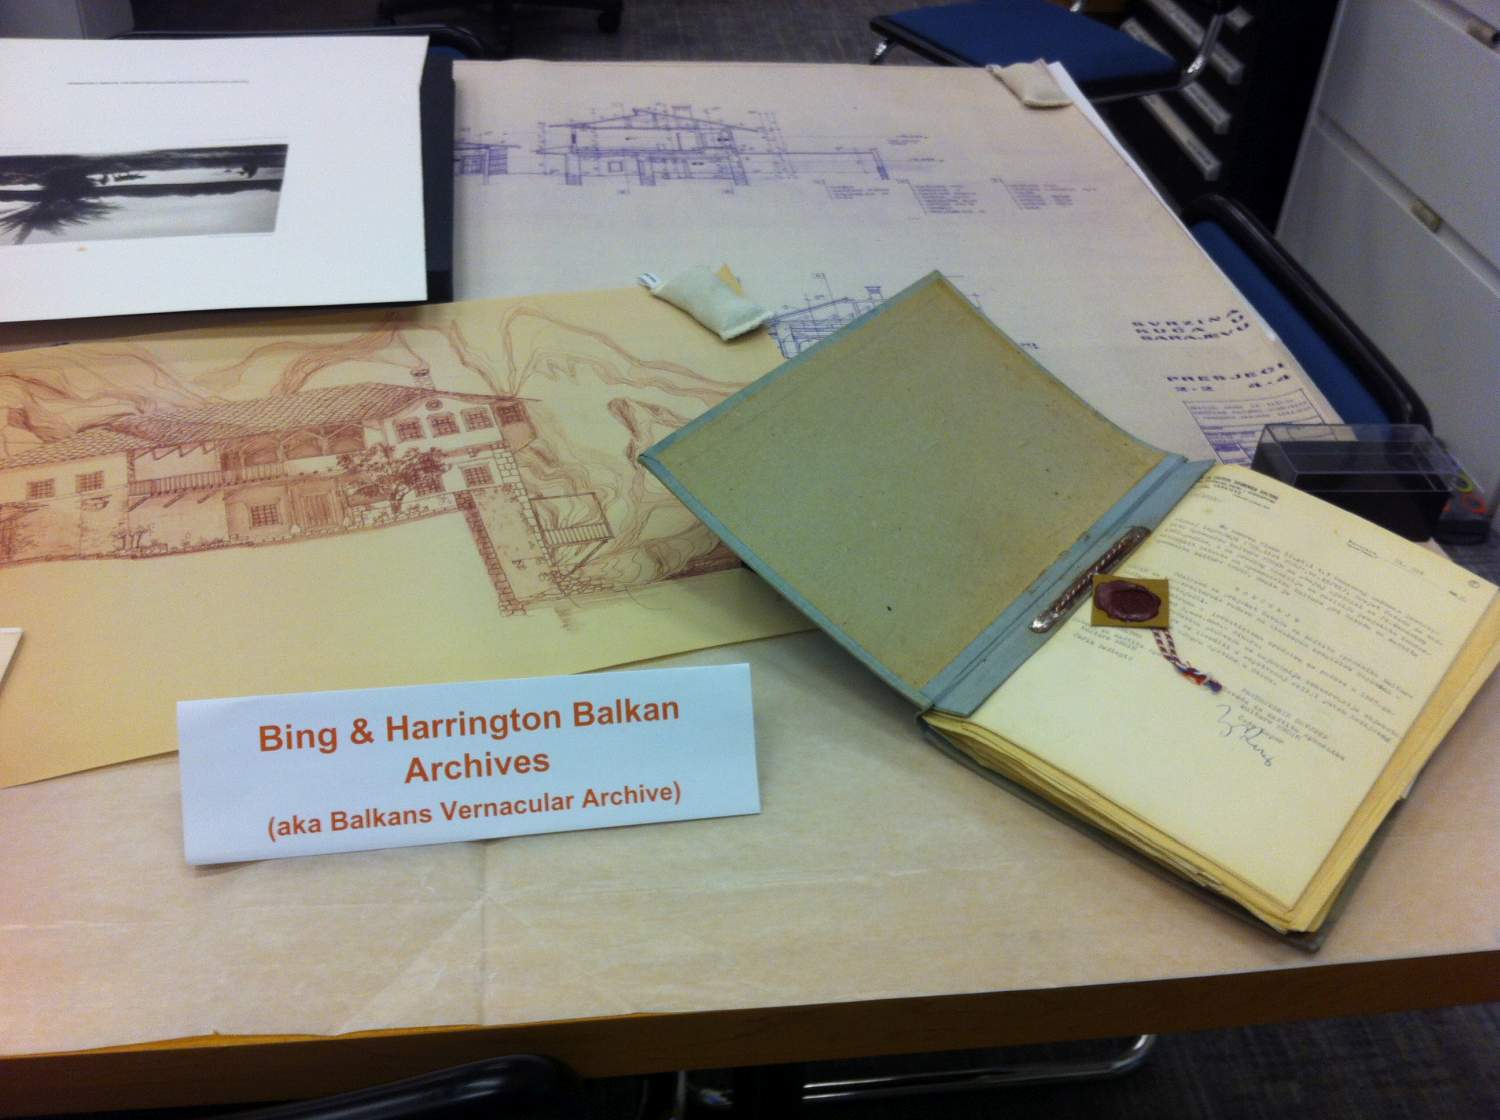 Drawings and documents from the Bing and Harrington Balkan Archives on display